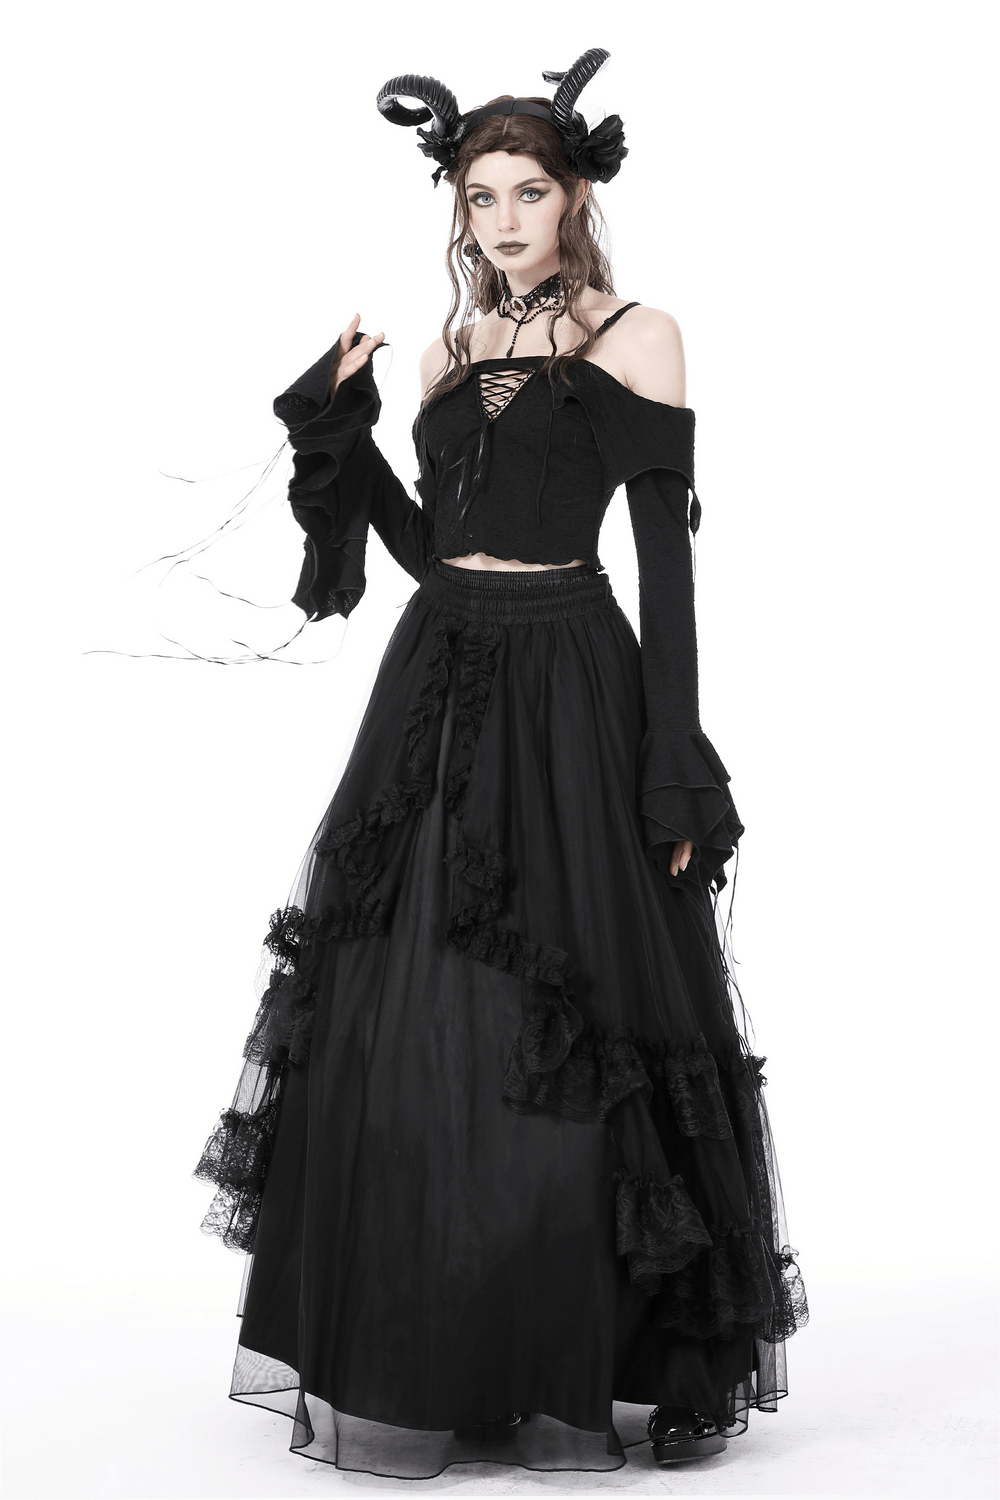 Gothic Pleated Off-Shoulder Cutout Top for Women